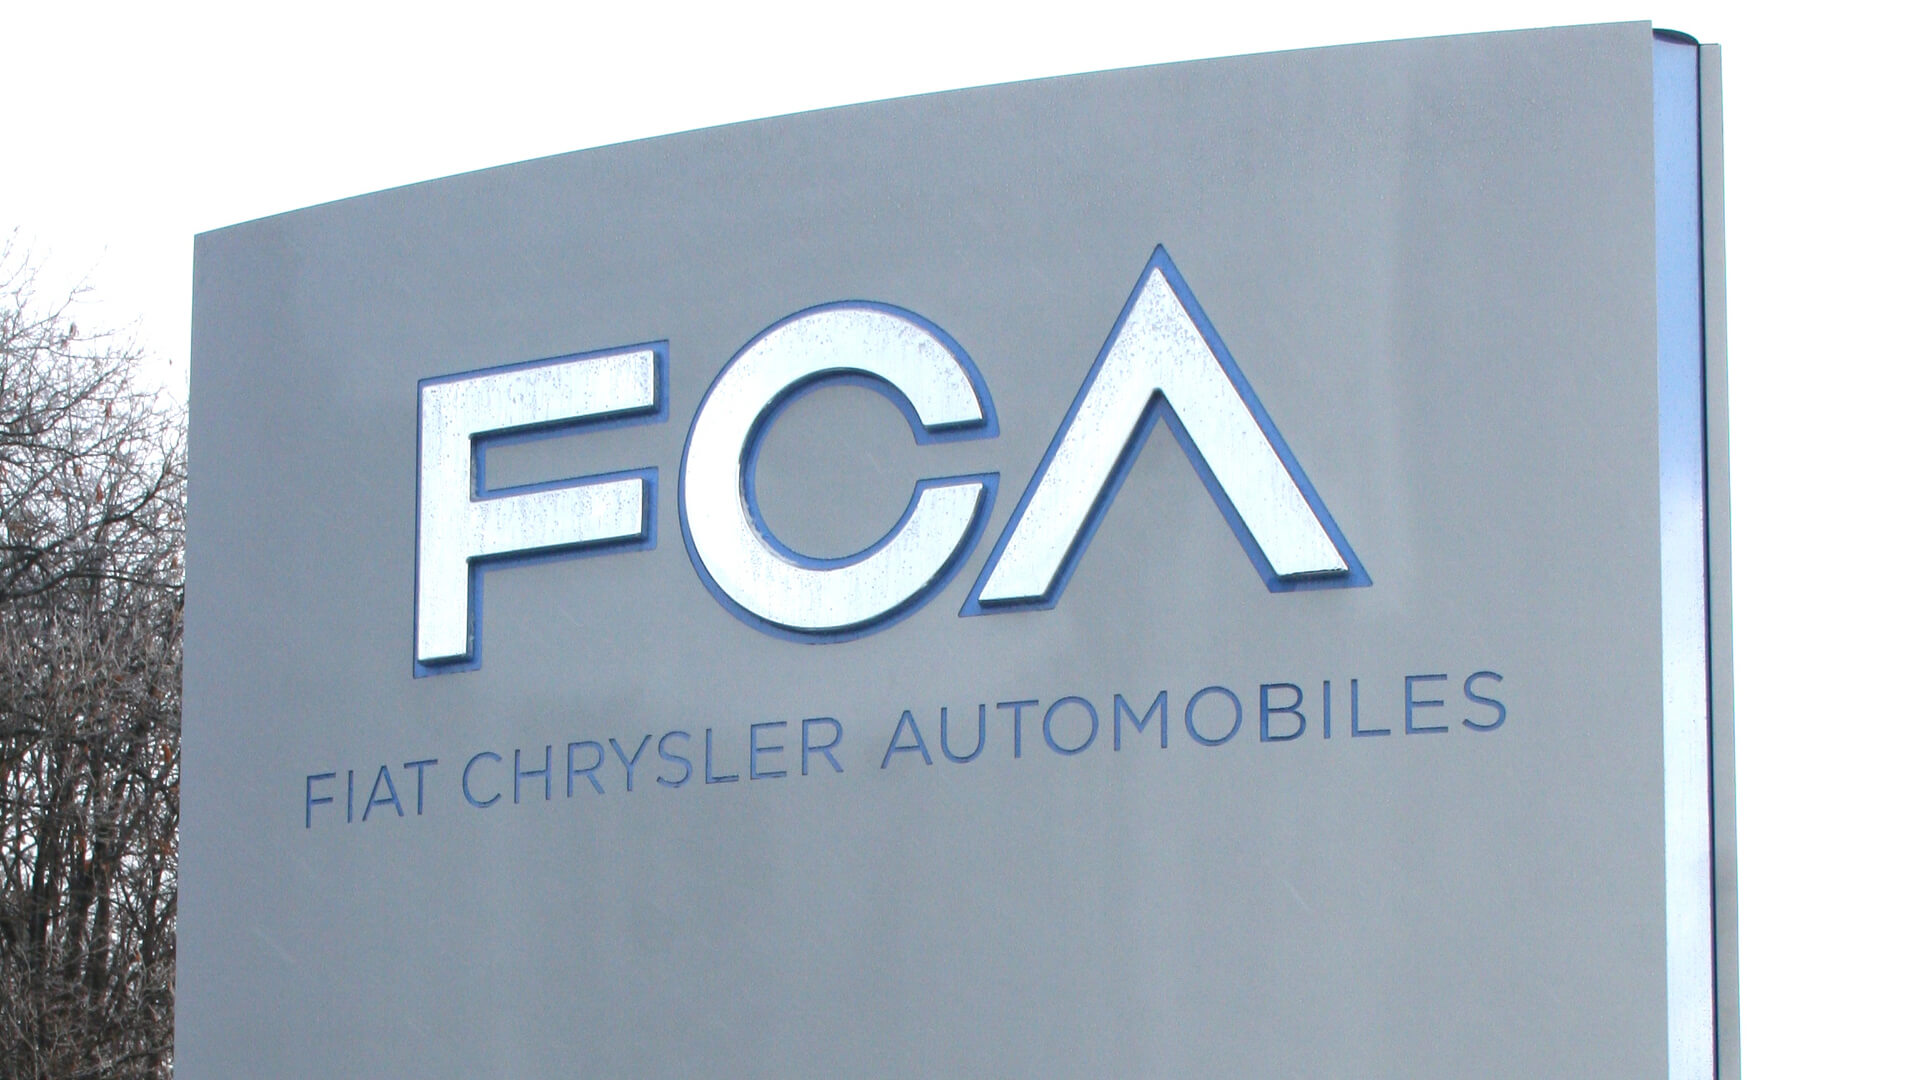 Fiat Chrysler issues recall for 4.8 million cars that could get stuck in cruise control